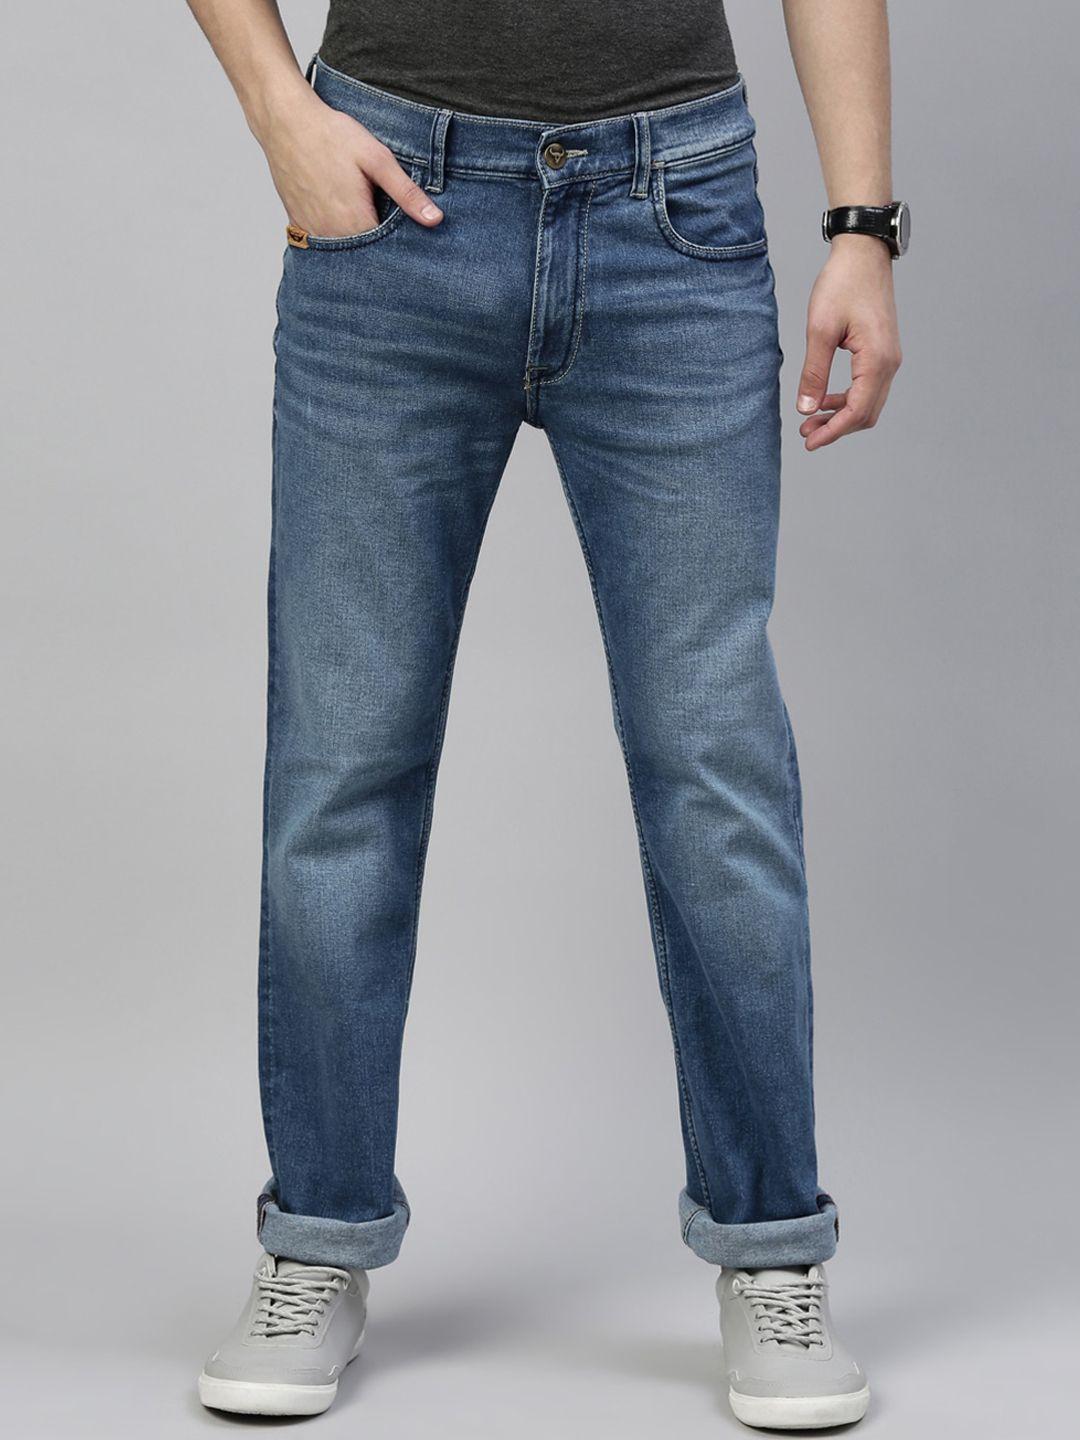 american-bull-men-blue-light-fade-stretchable-jeans